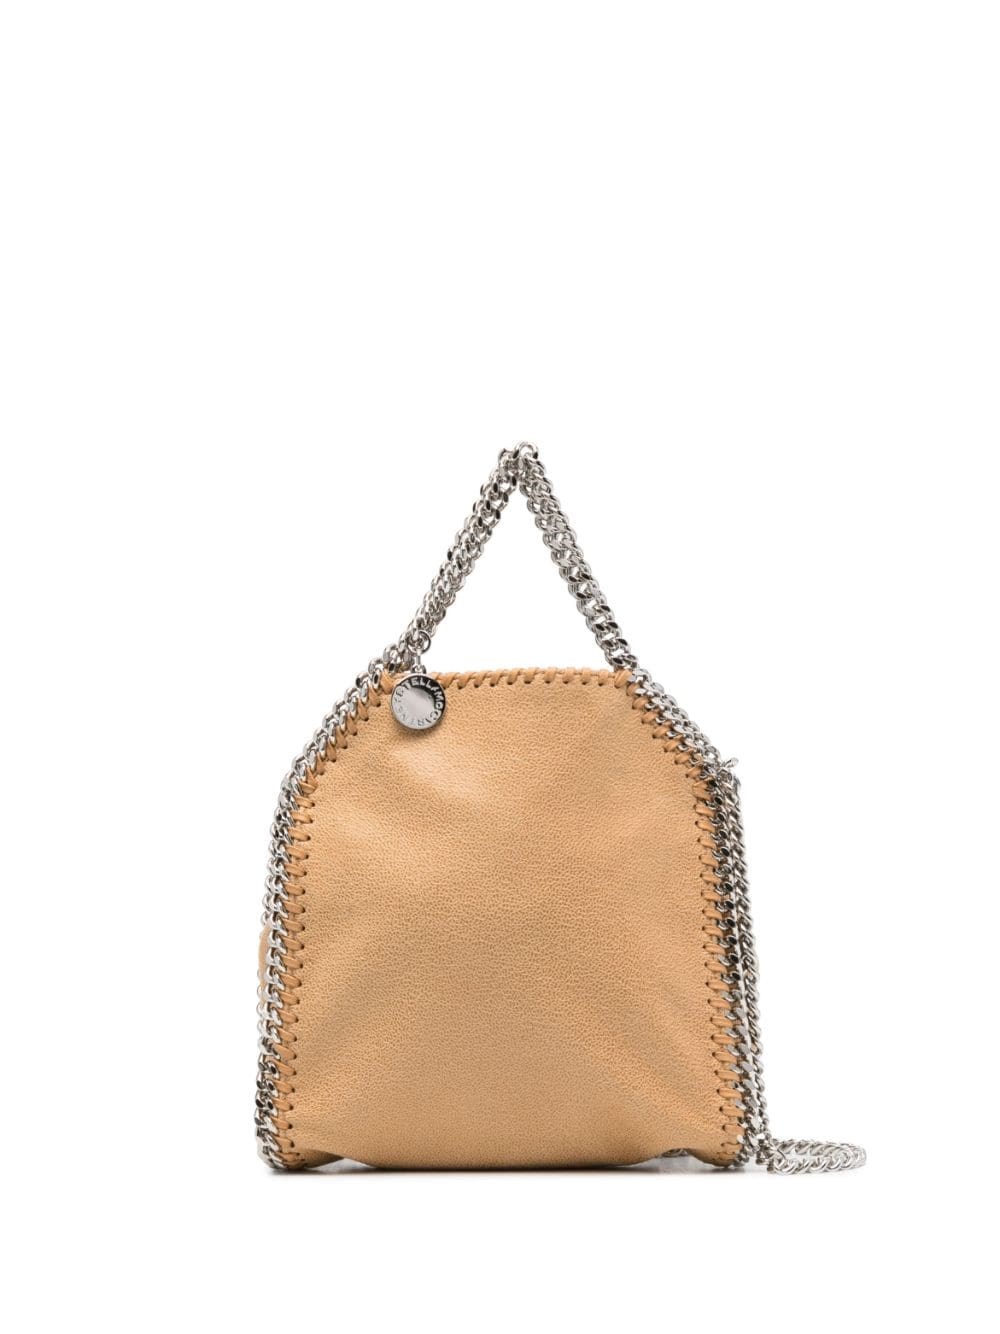 Stella Mccartney Shaggy Tiny Tote In Nude & Neutrals